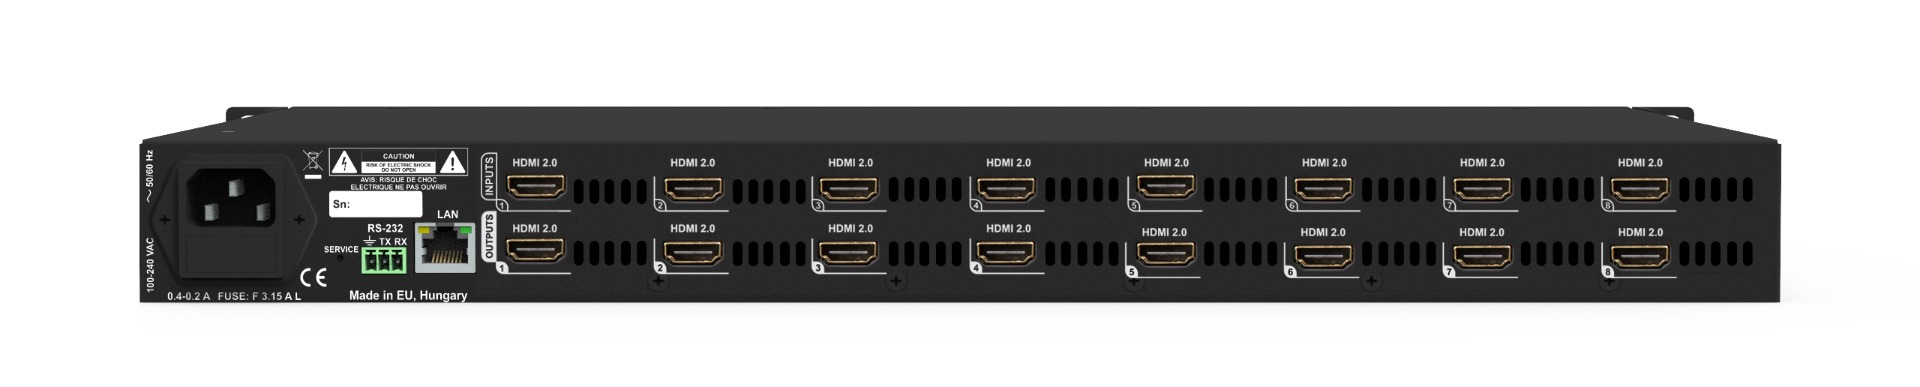 Lightware Visual Engineering MX2-8x8-HDMI20-L for rent